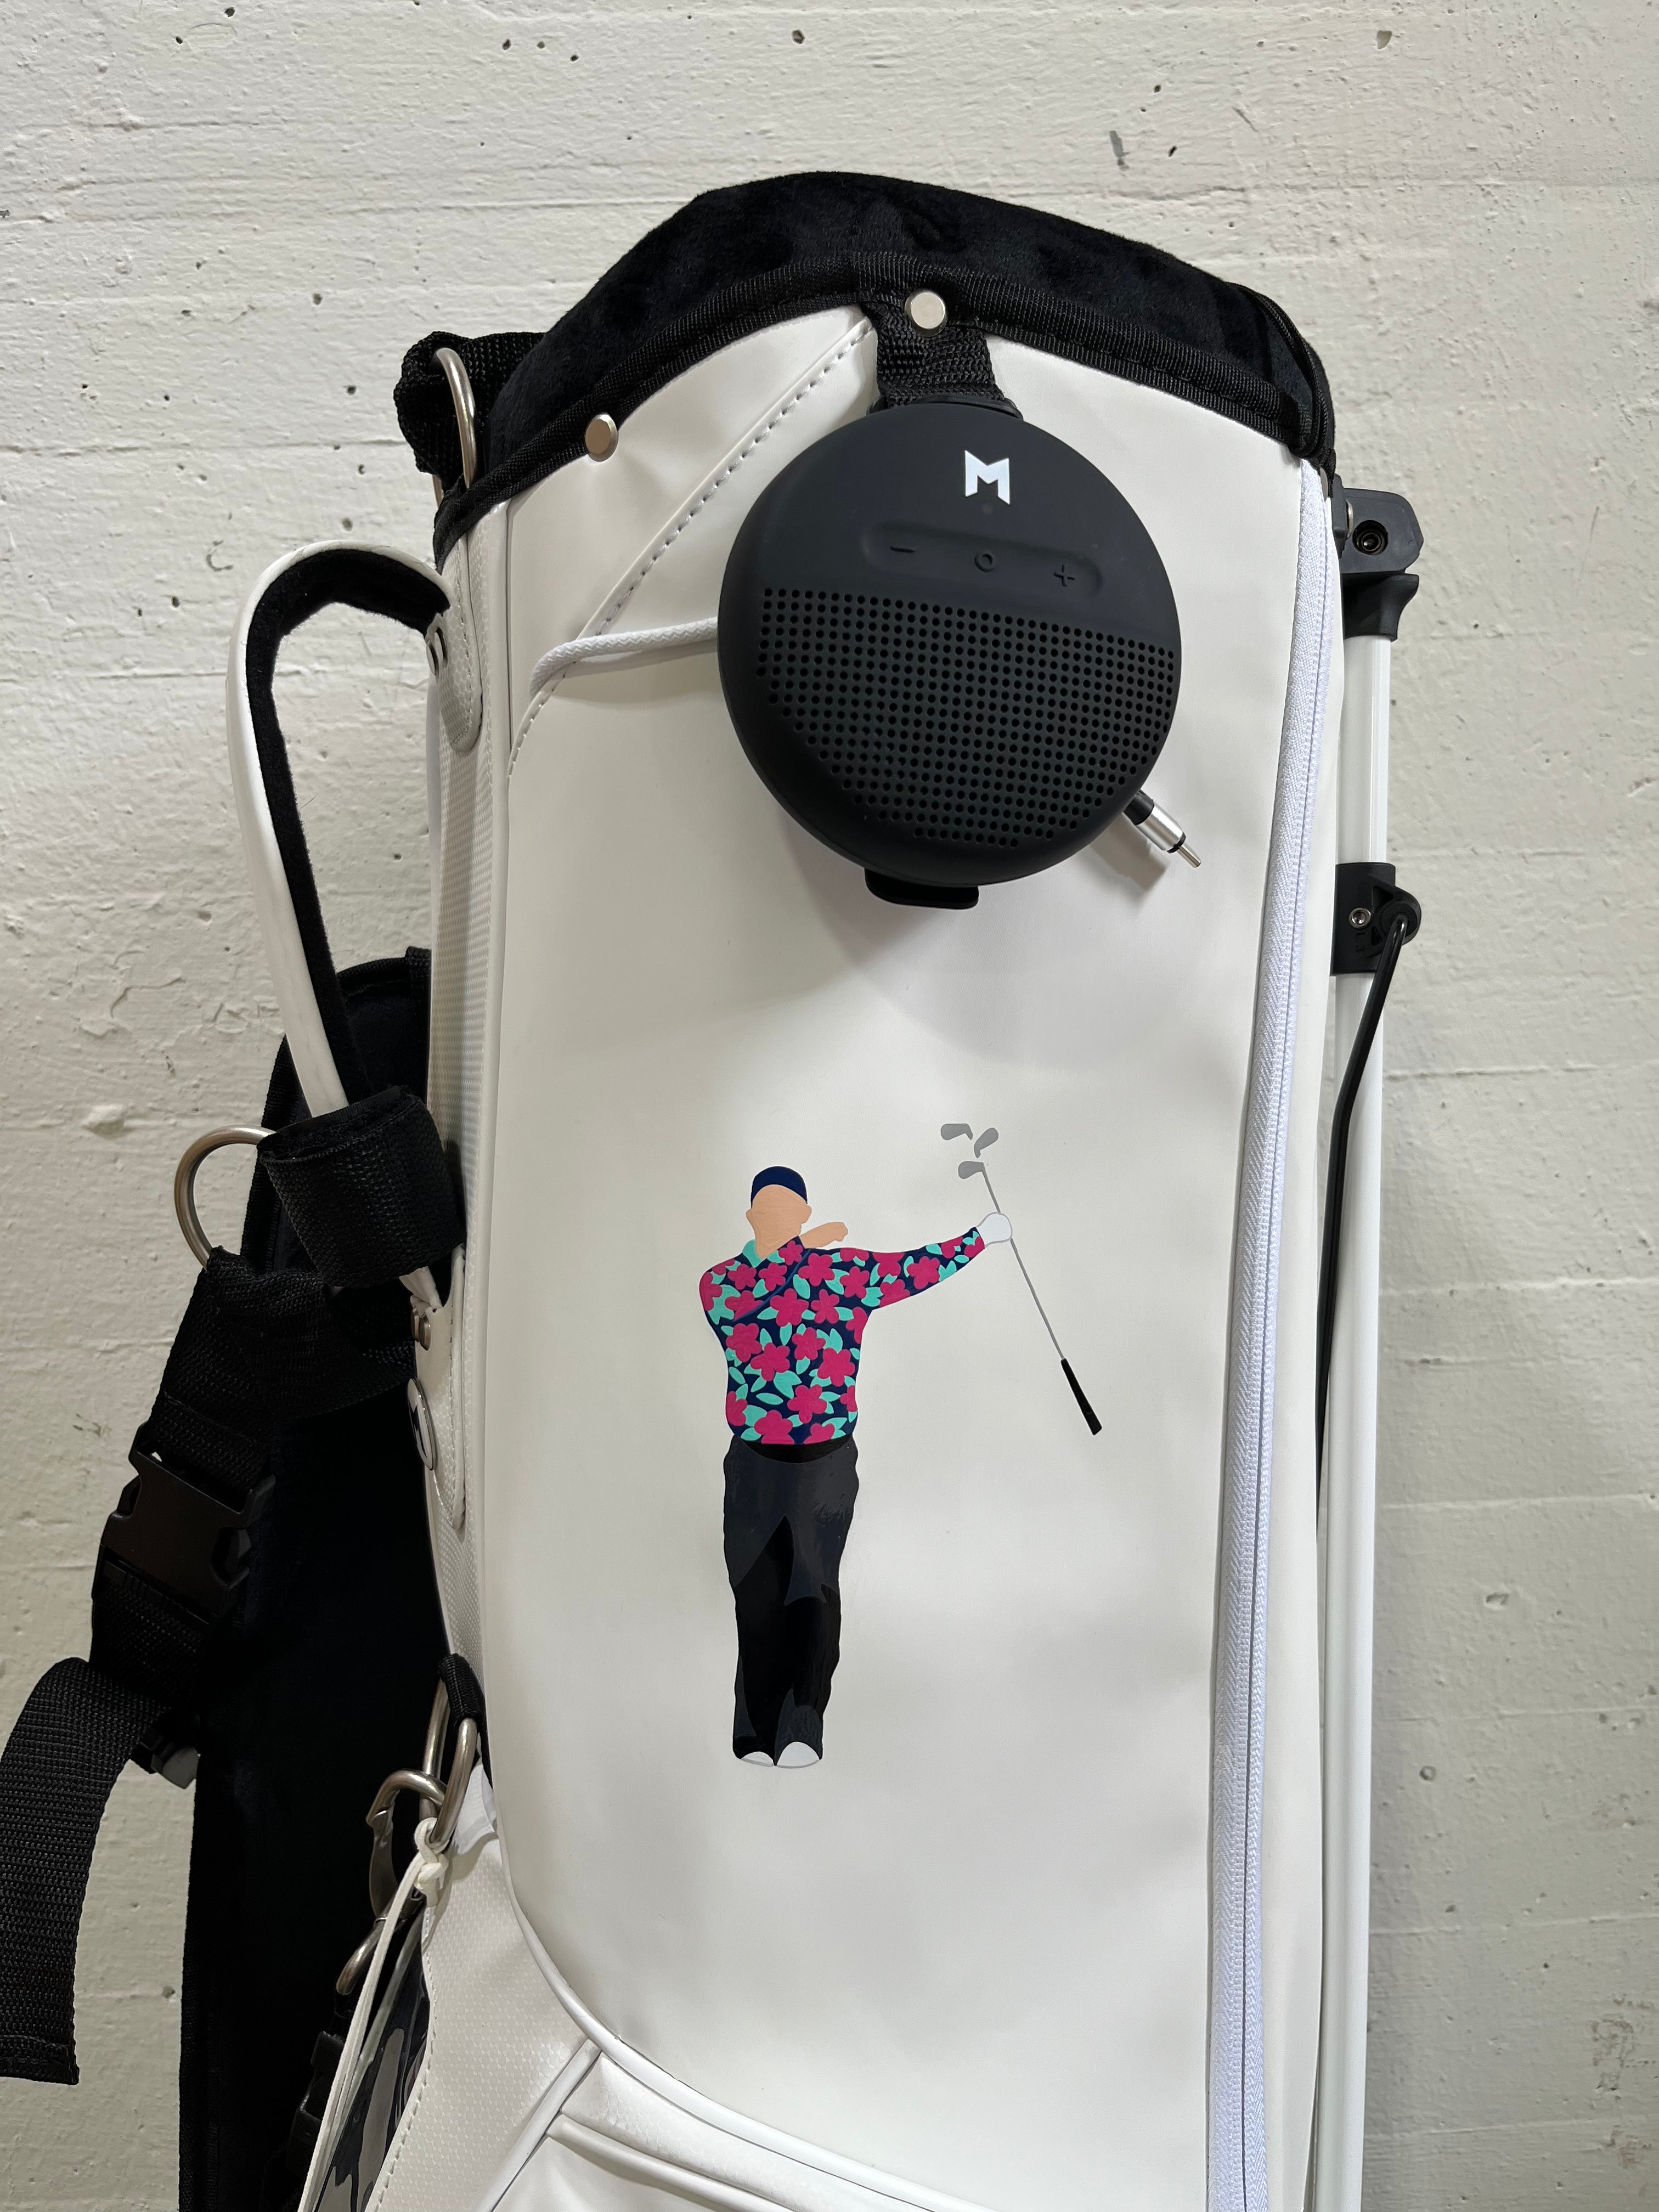 MNML GOLF white bag with custom hand painted graphic.